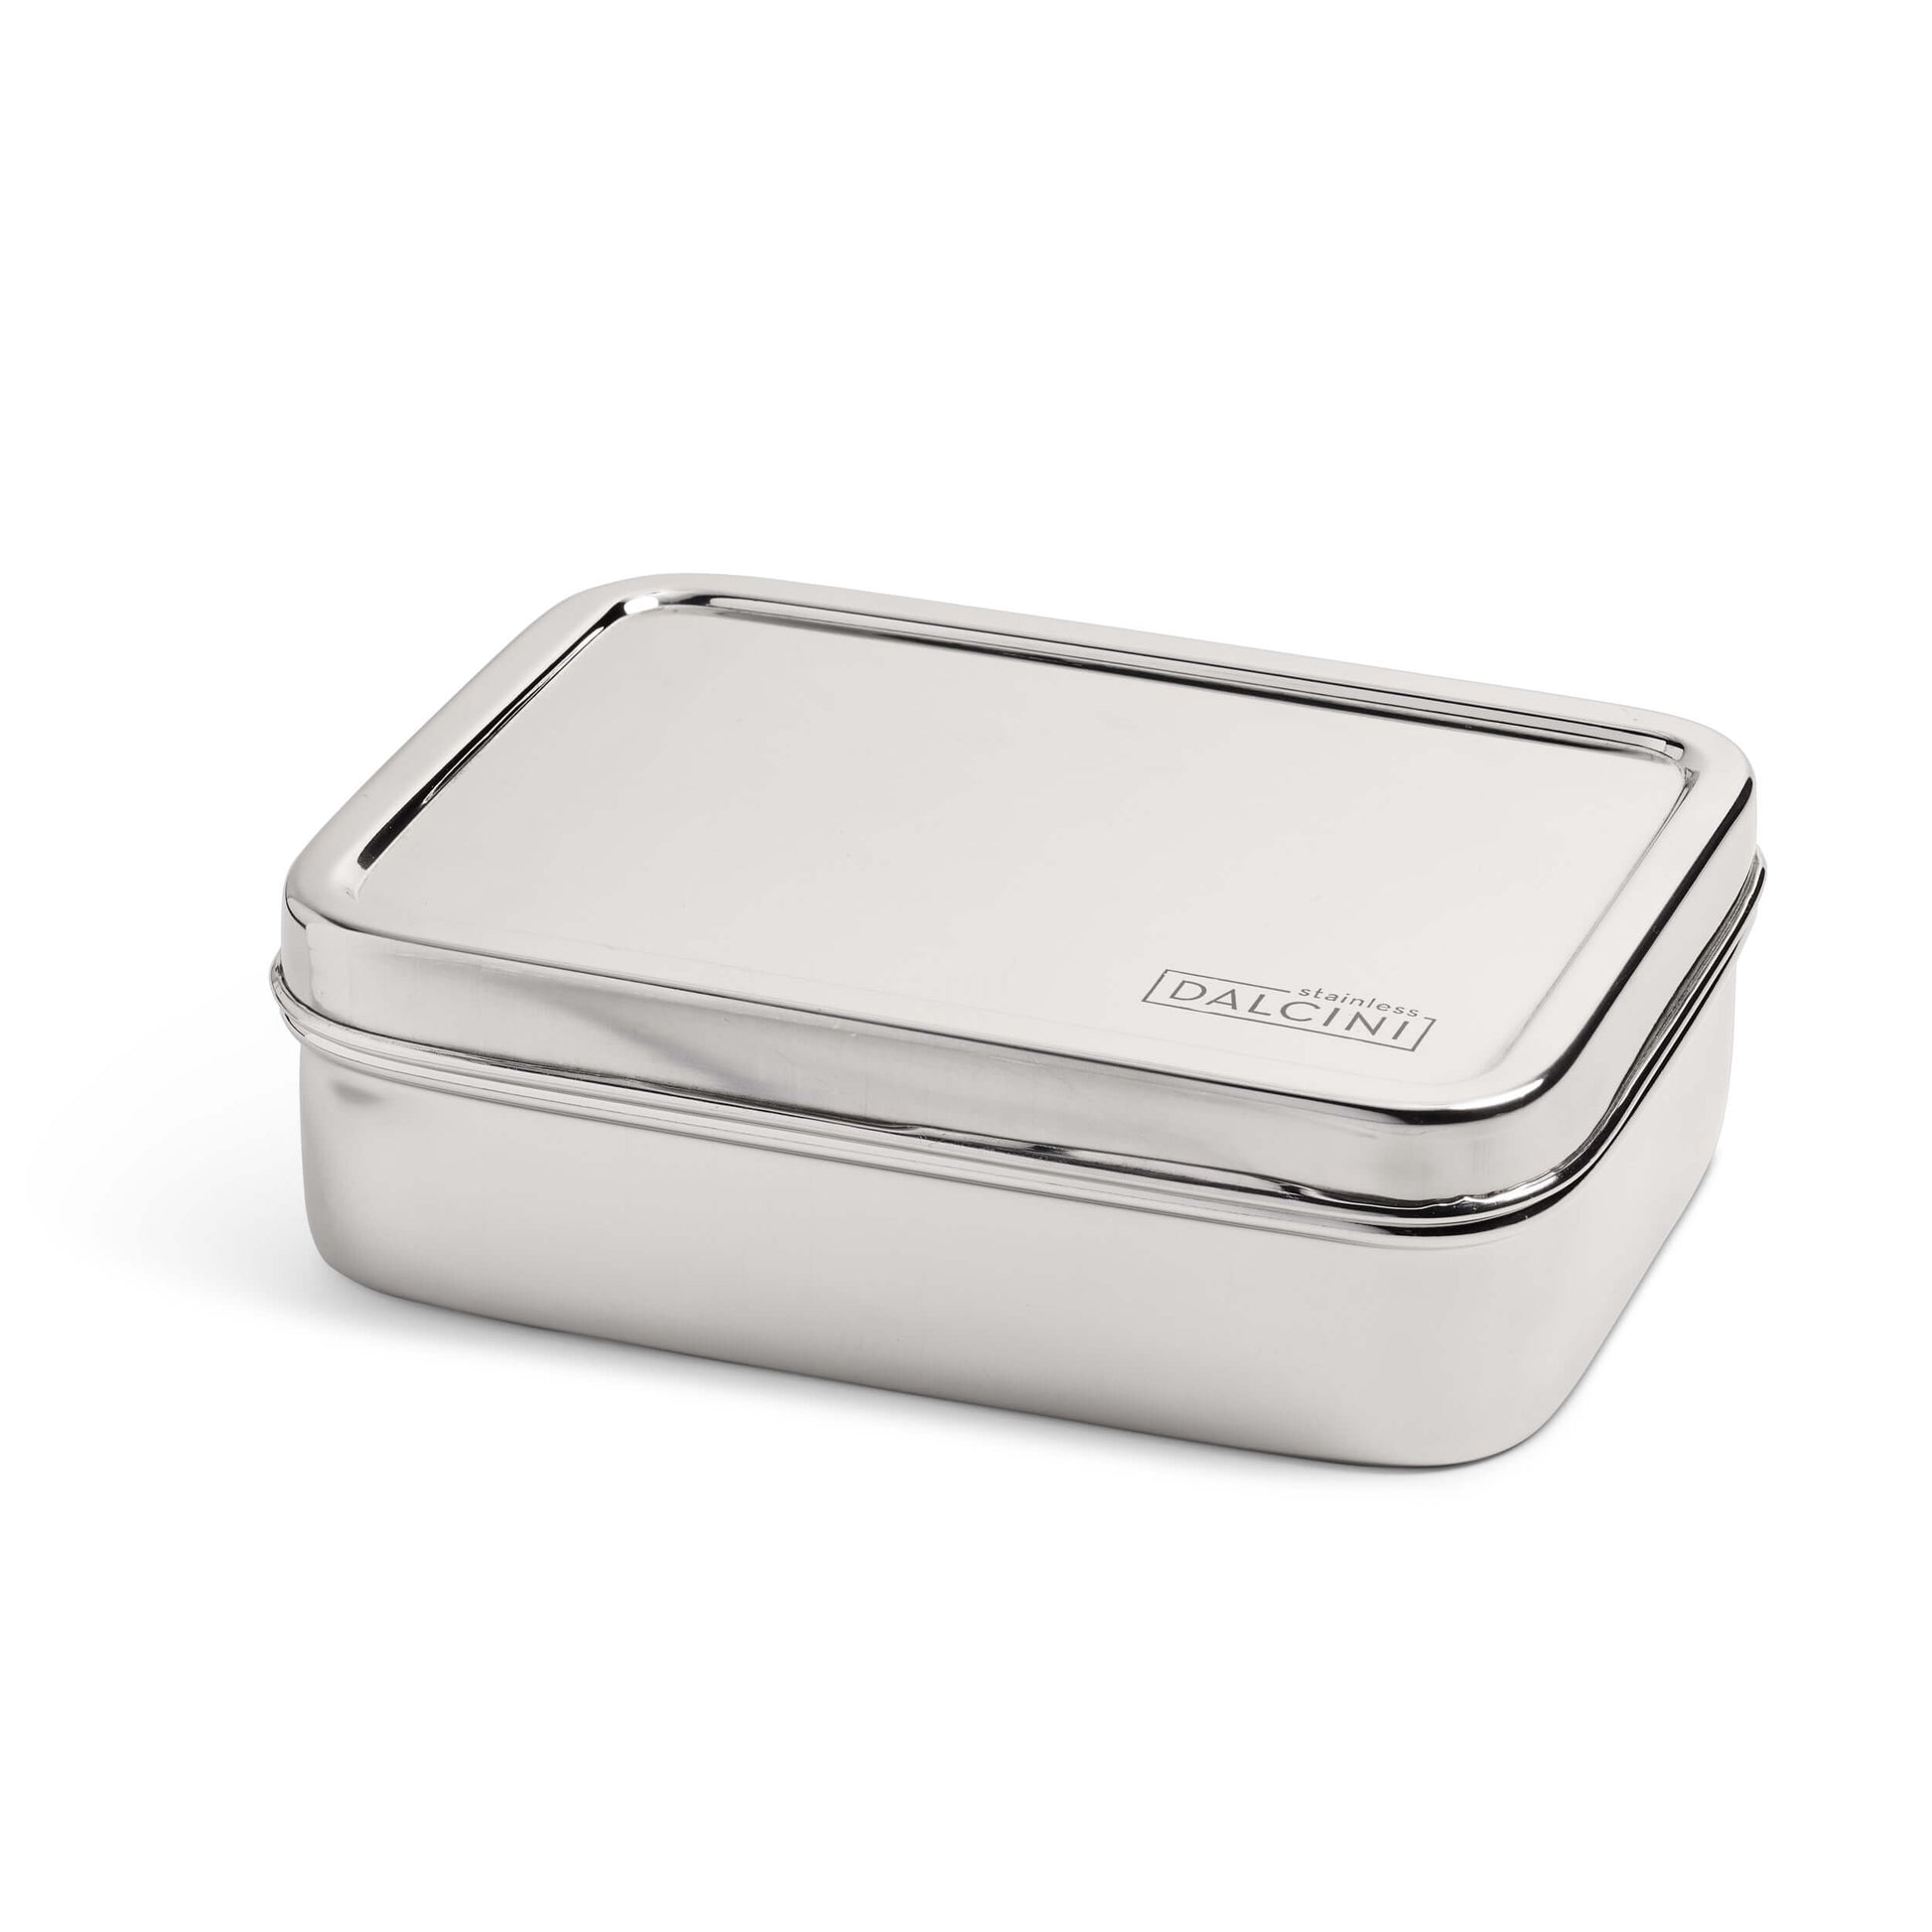 Stainless steel food storage box with closed lid